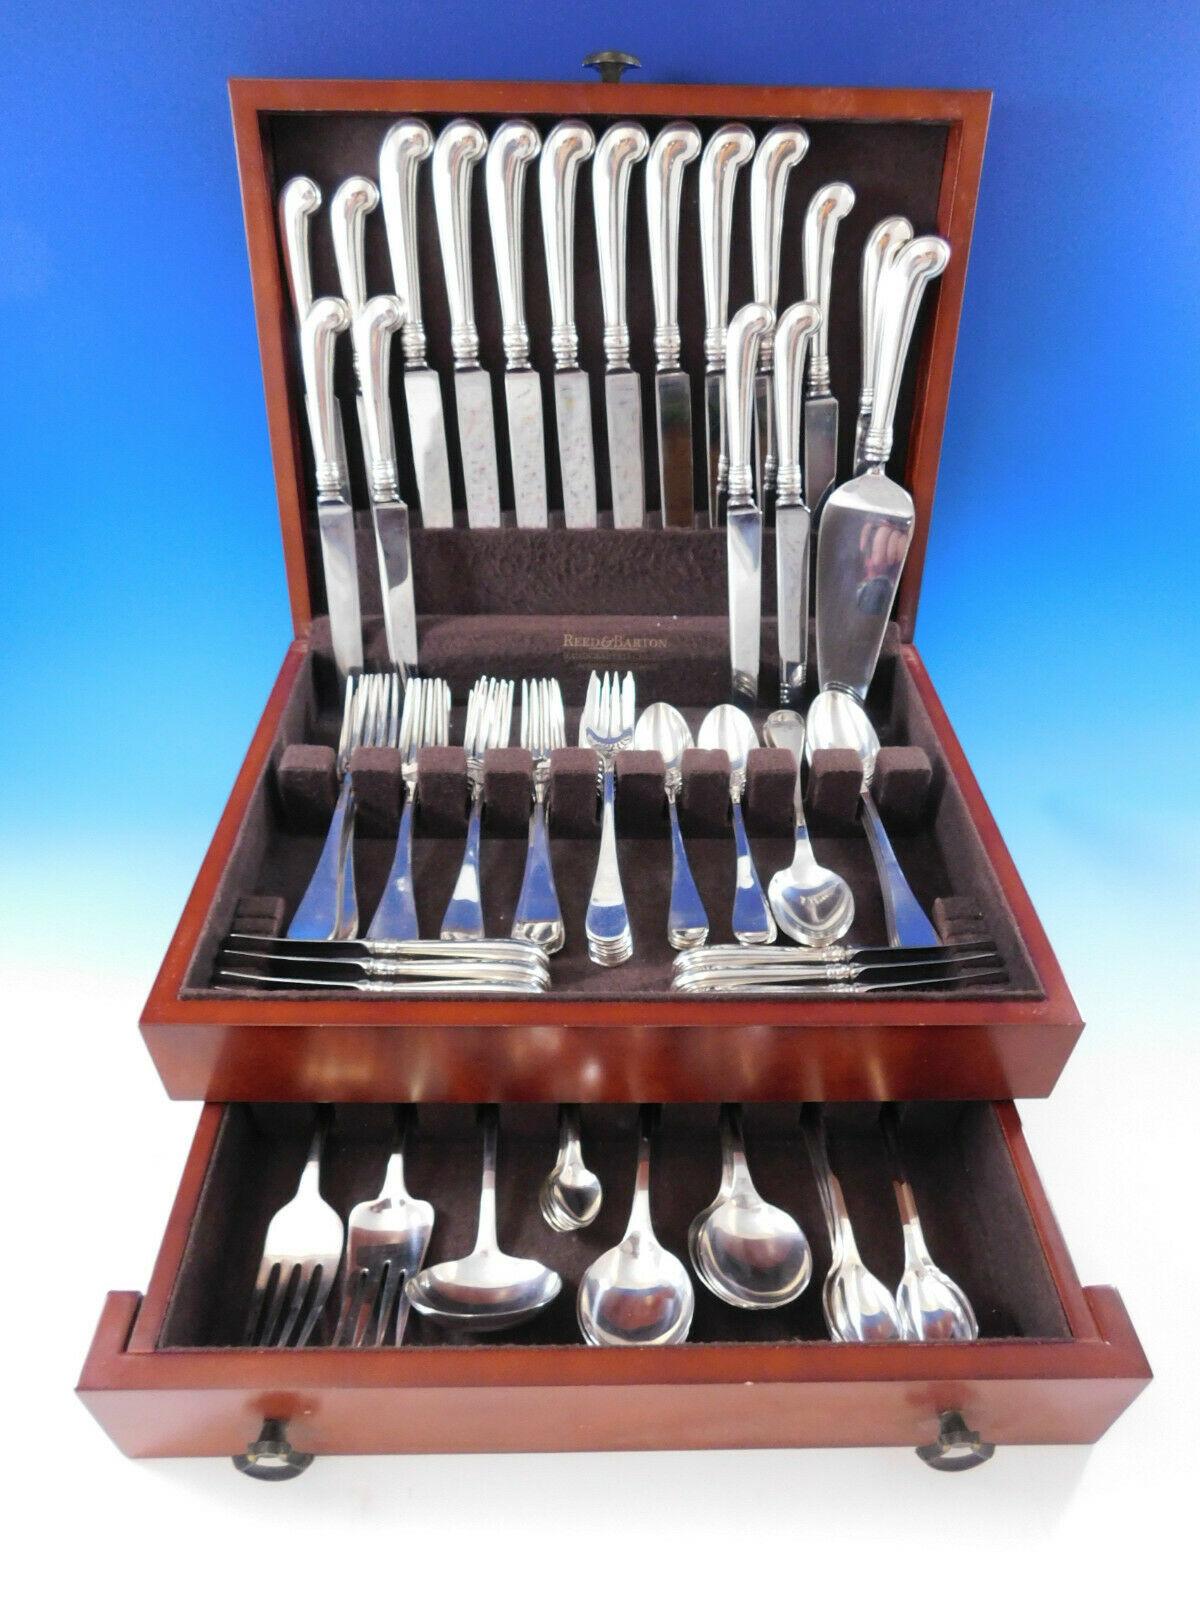 Superb King William by Tiffany and Co. sterling silver flatware set, 92 pieces. This old English style pattern was introduced in the year 1870. The pieces are large and heavy, with wonderful pistol grip handle knives. This set includes:

8 dinner